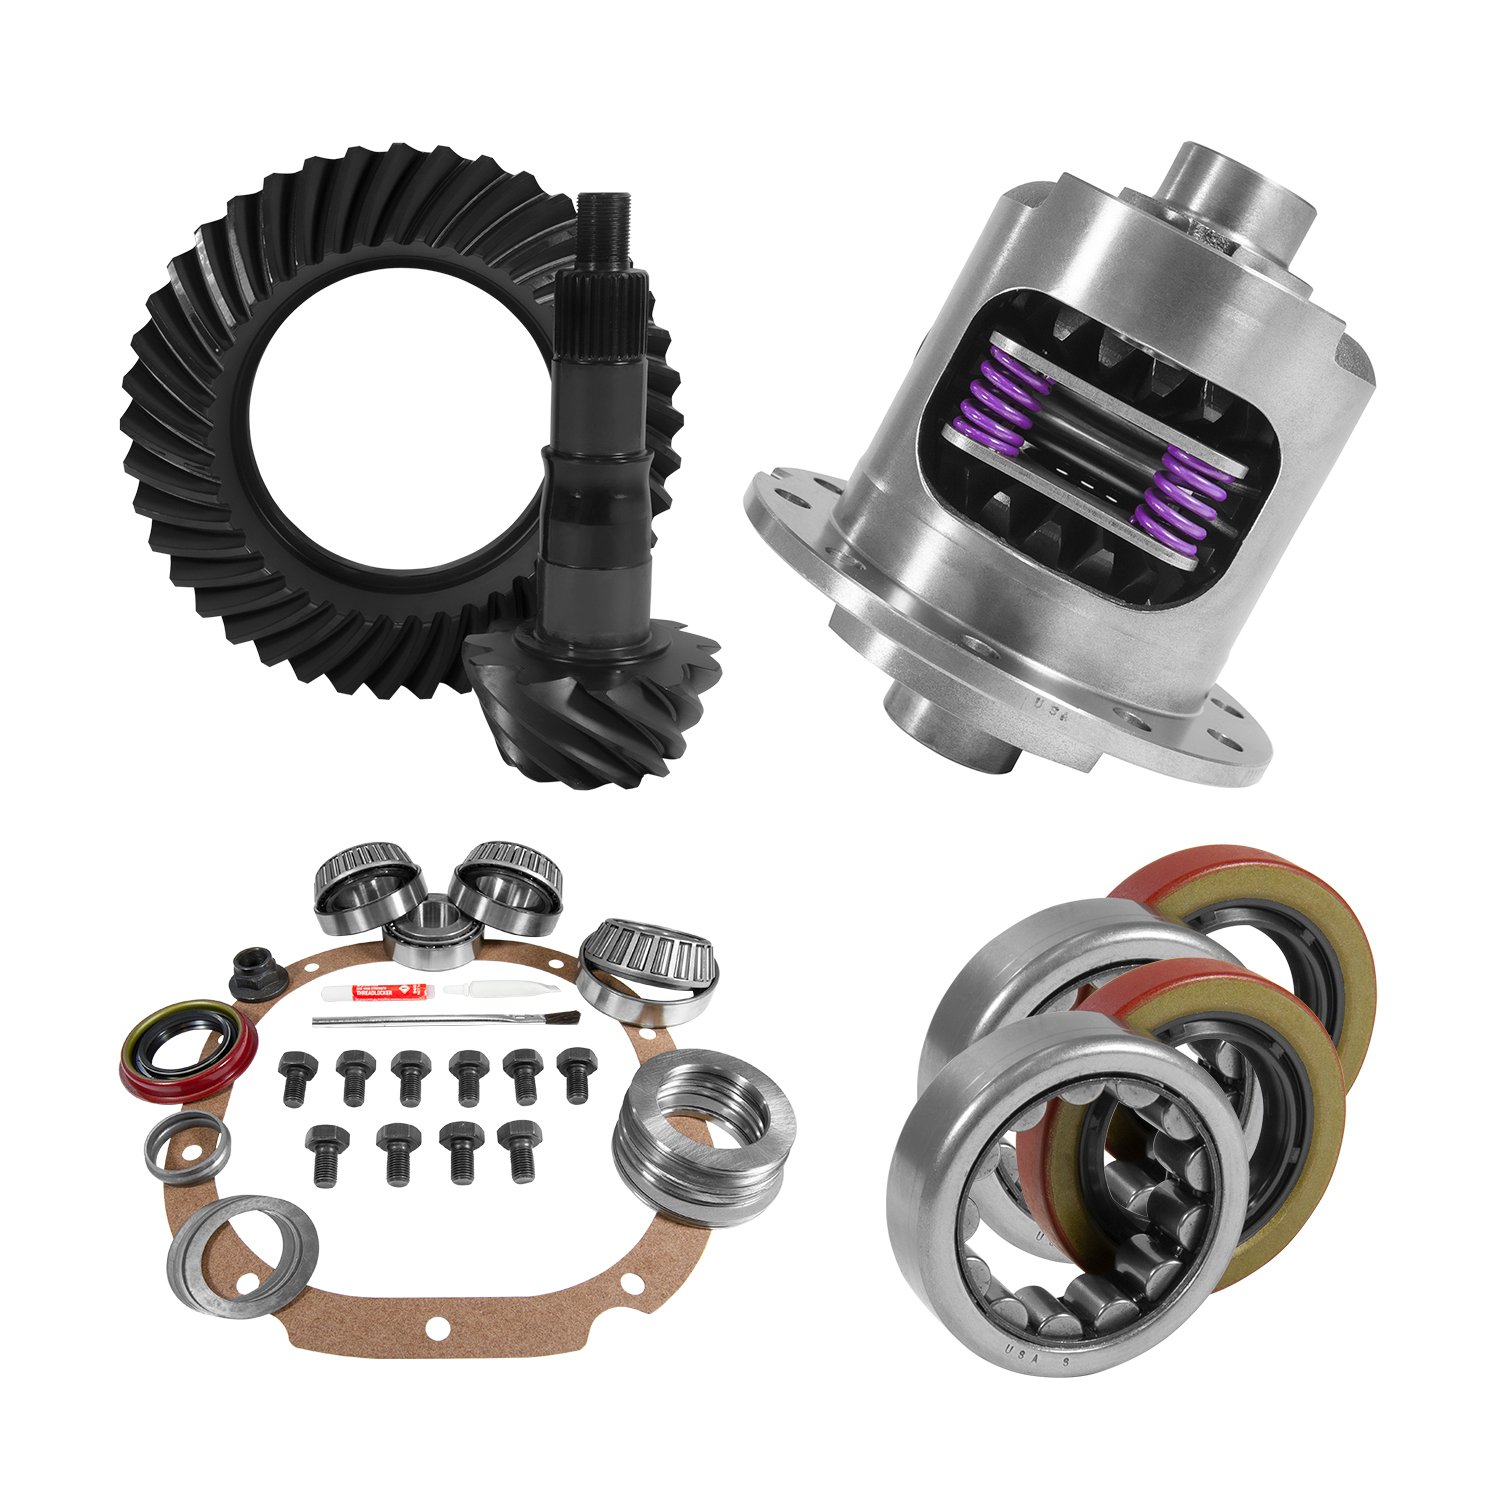 USA Standard 10676 8.8 in. Ford 3.31 Rear Ring & Pinion Install Kit, 28Spl Posi, 2.25 in. Axle Bearings